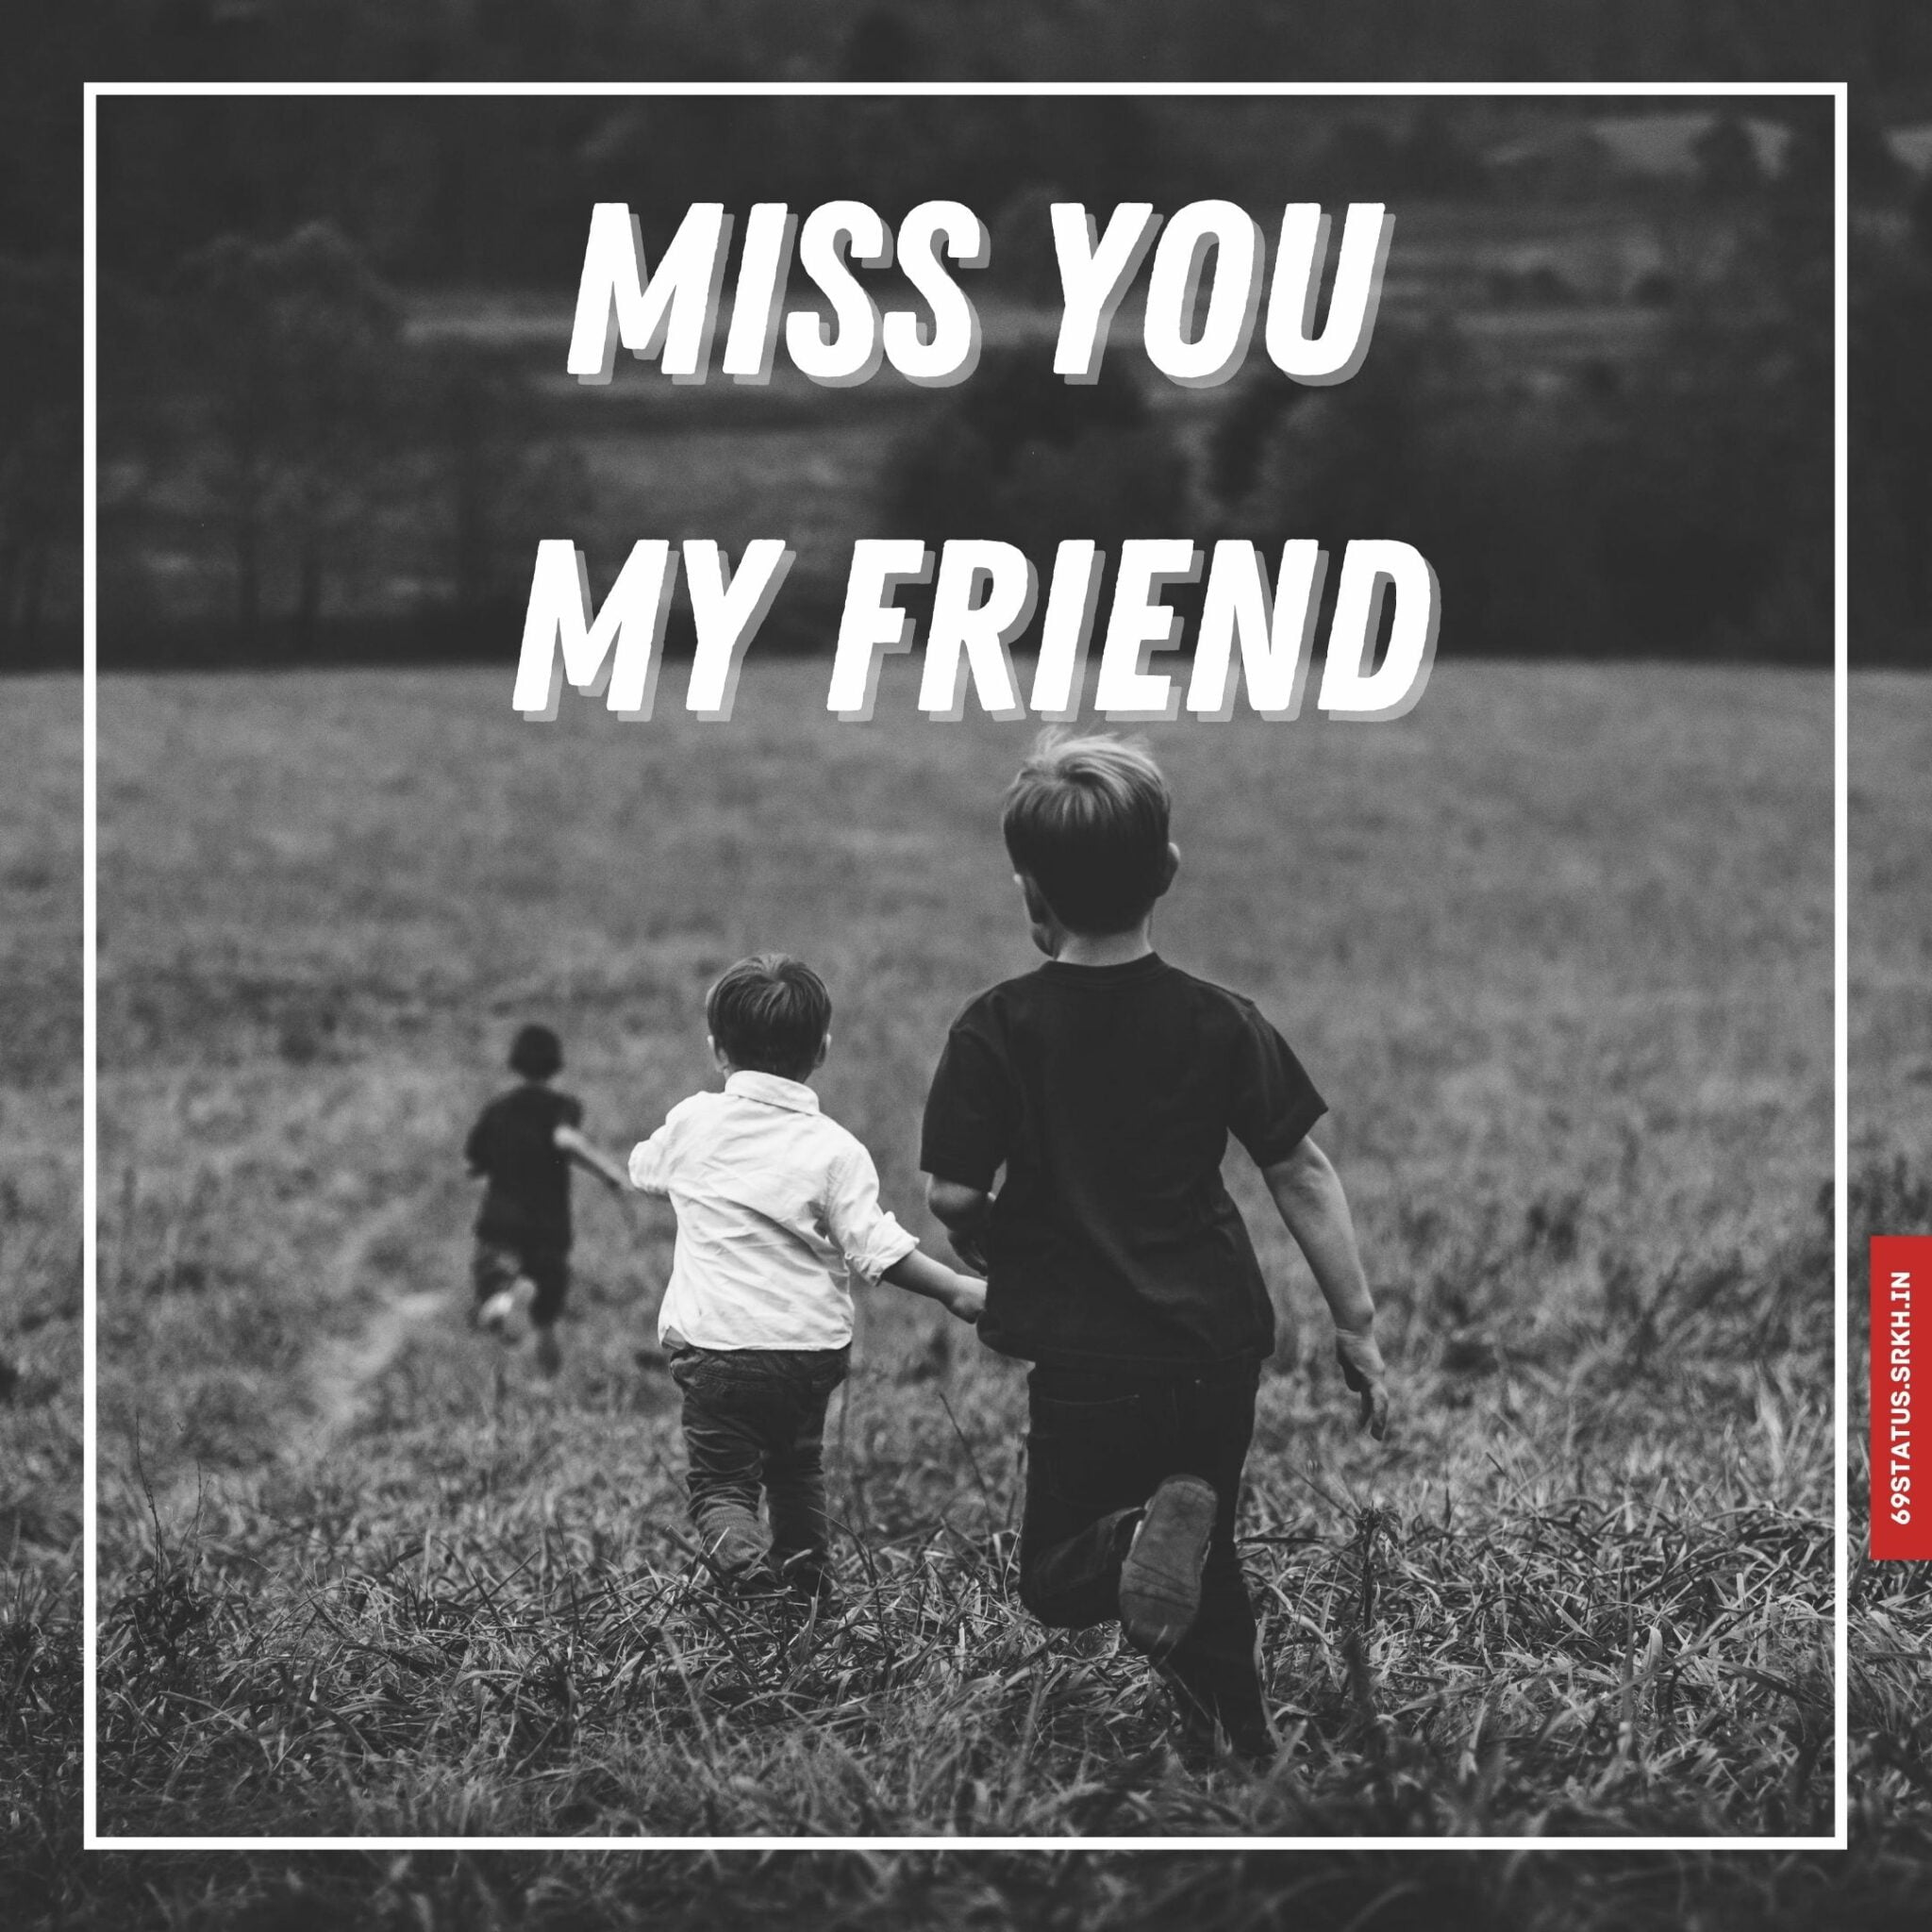 Cute miss you friend images